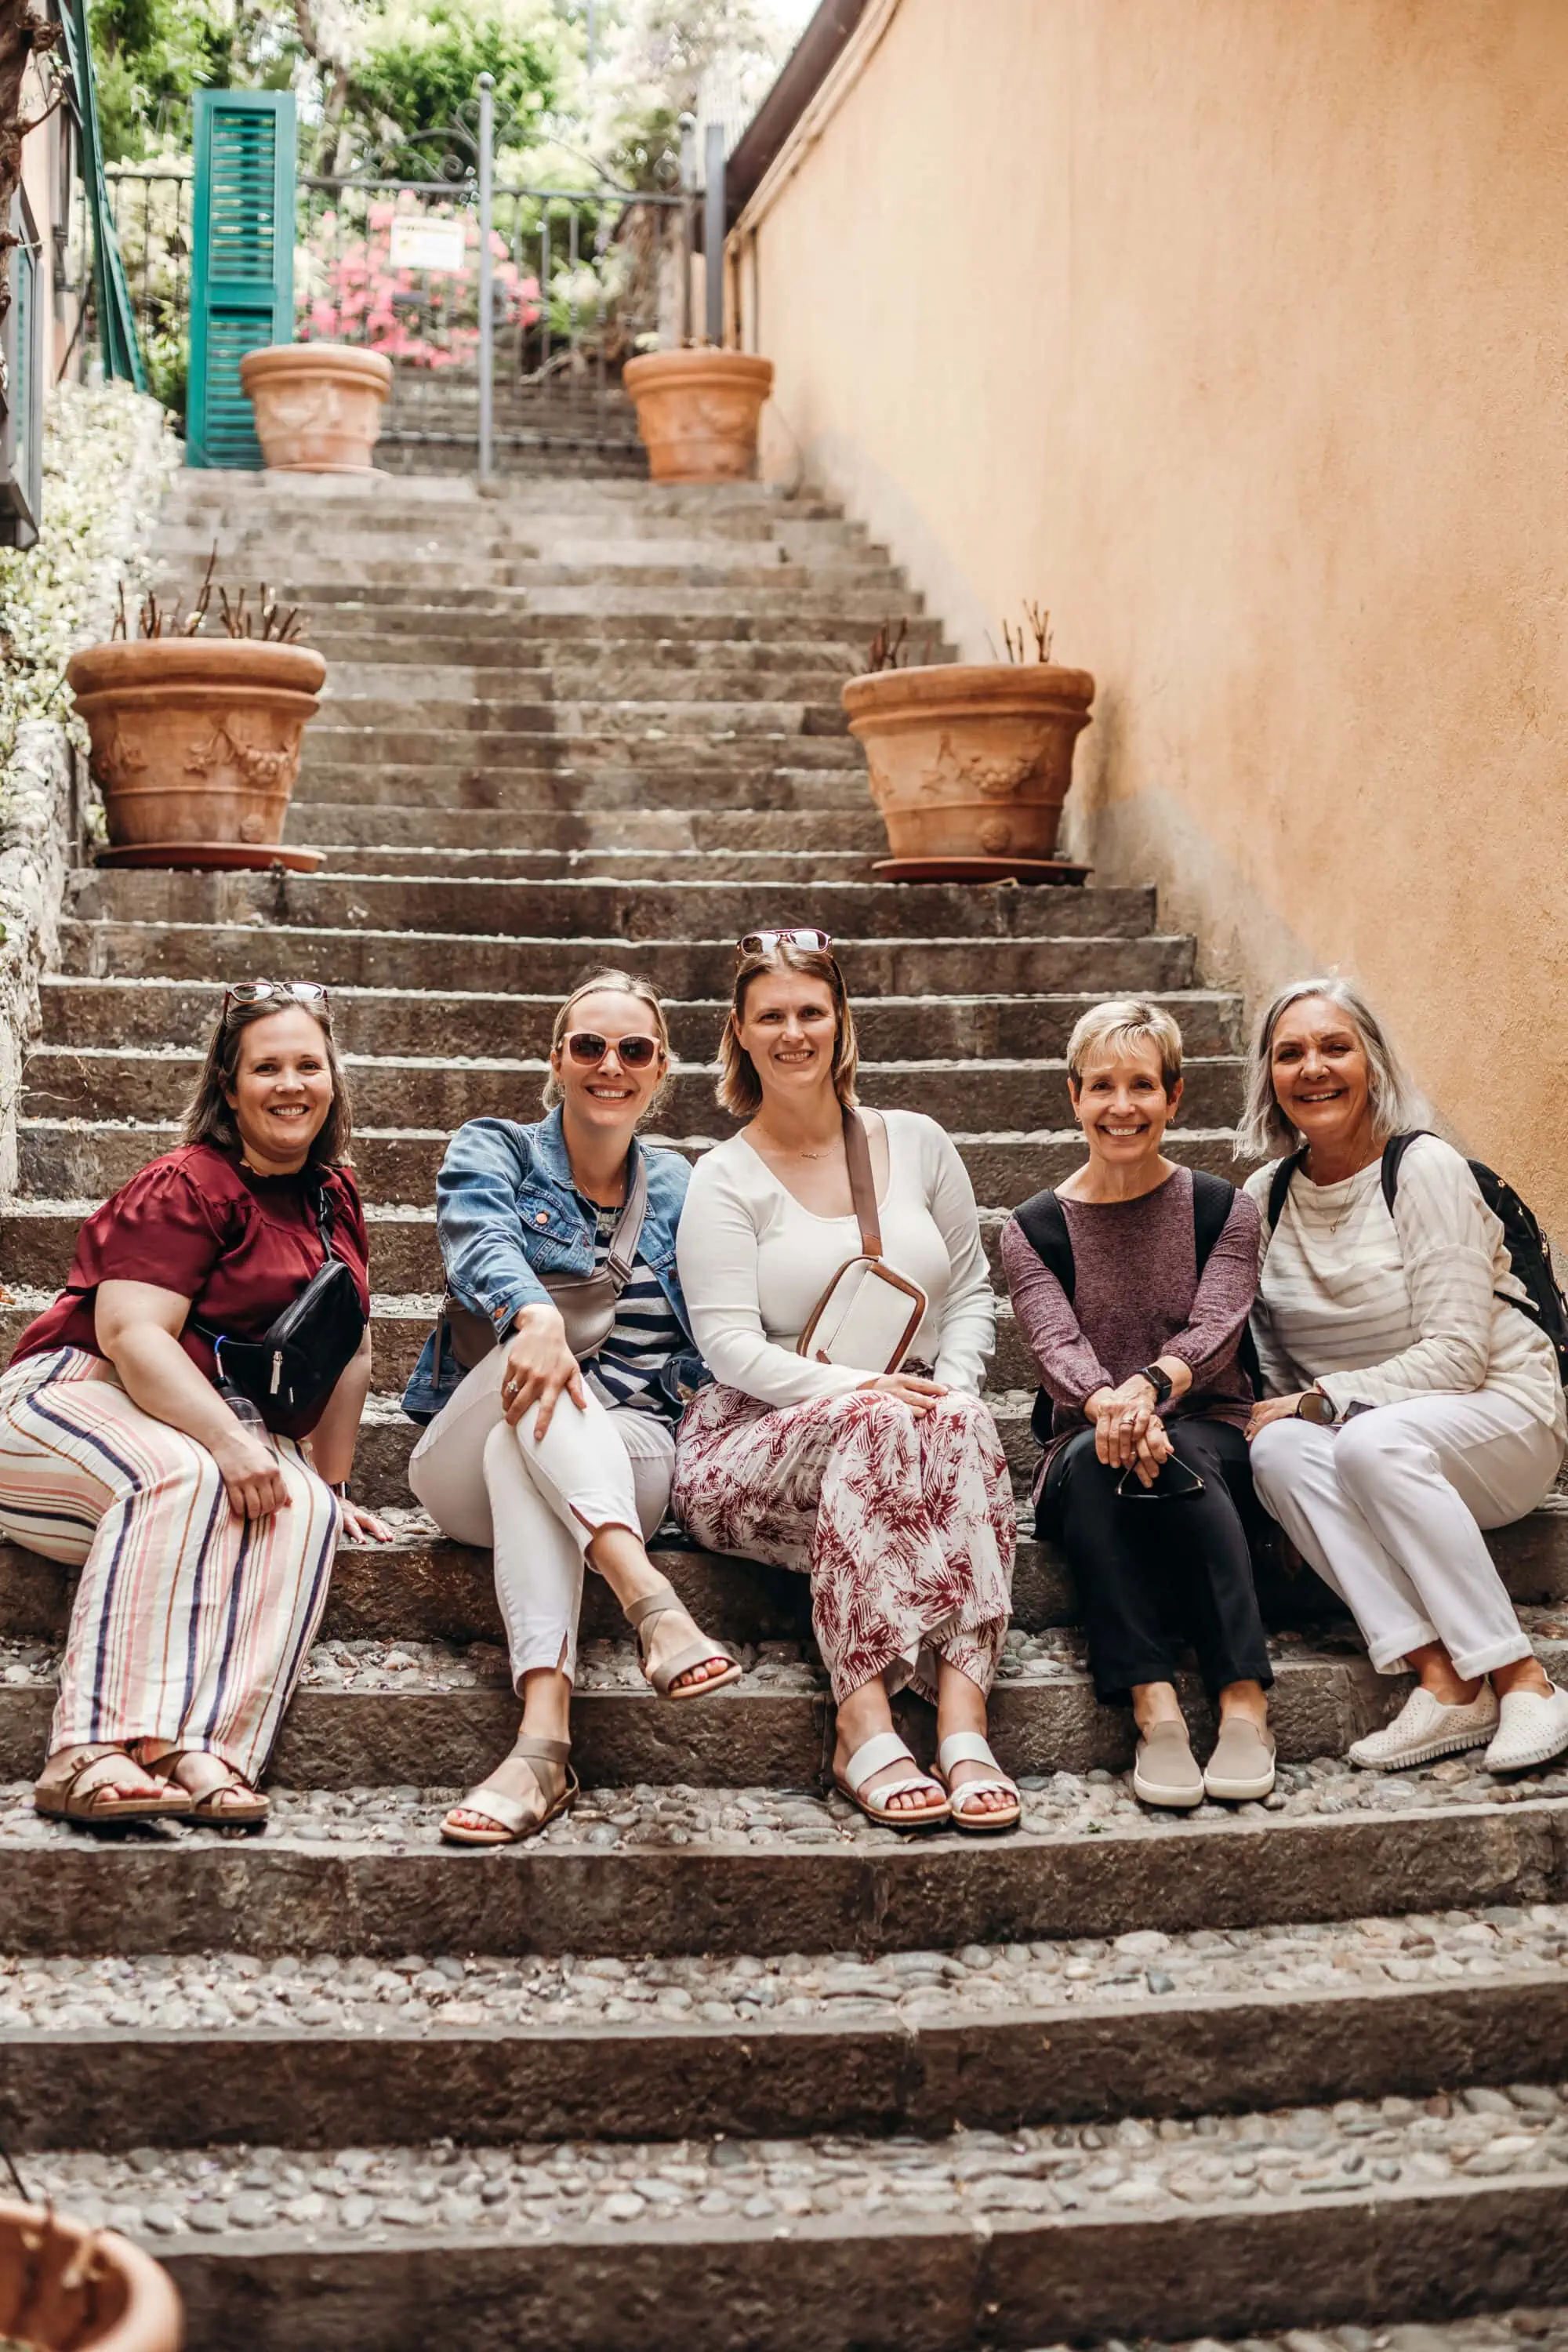 Our group of women in Italy